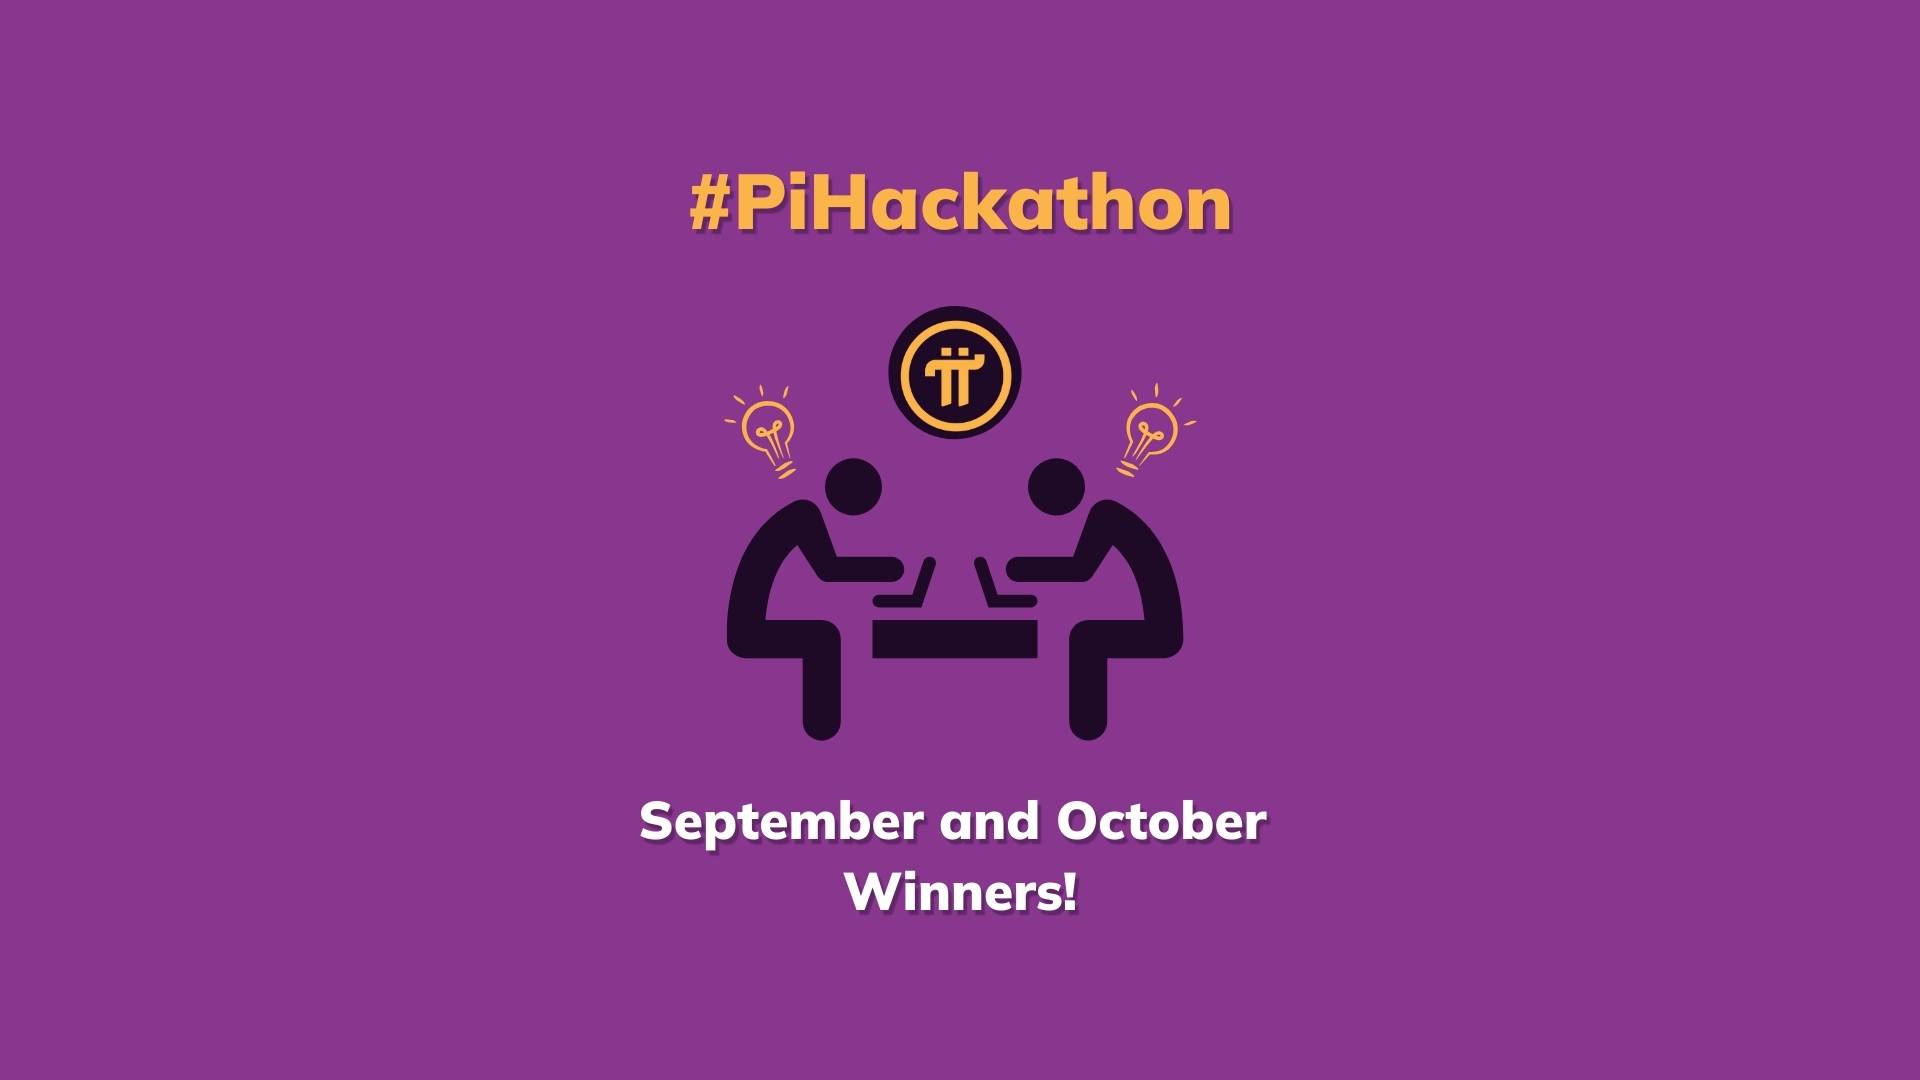 Announcing the September and October #PiHackathon Winners